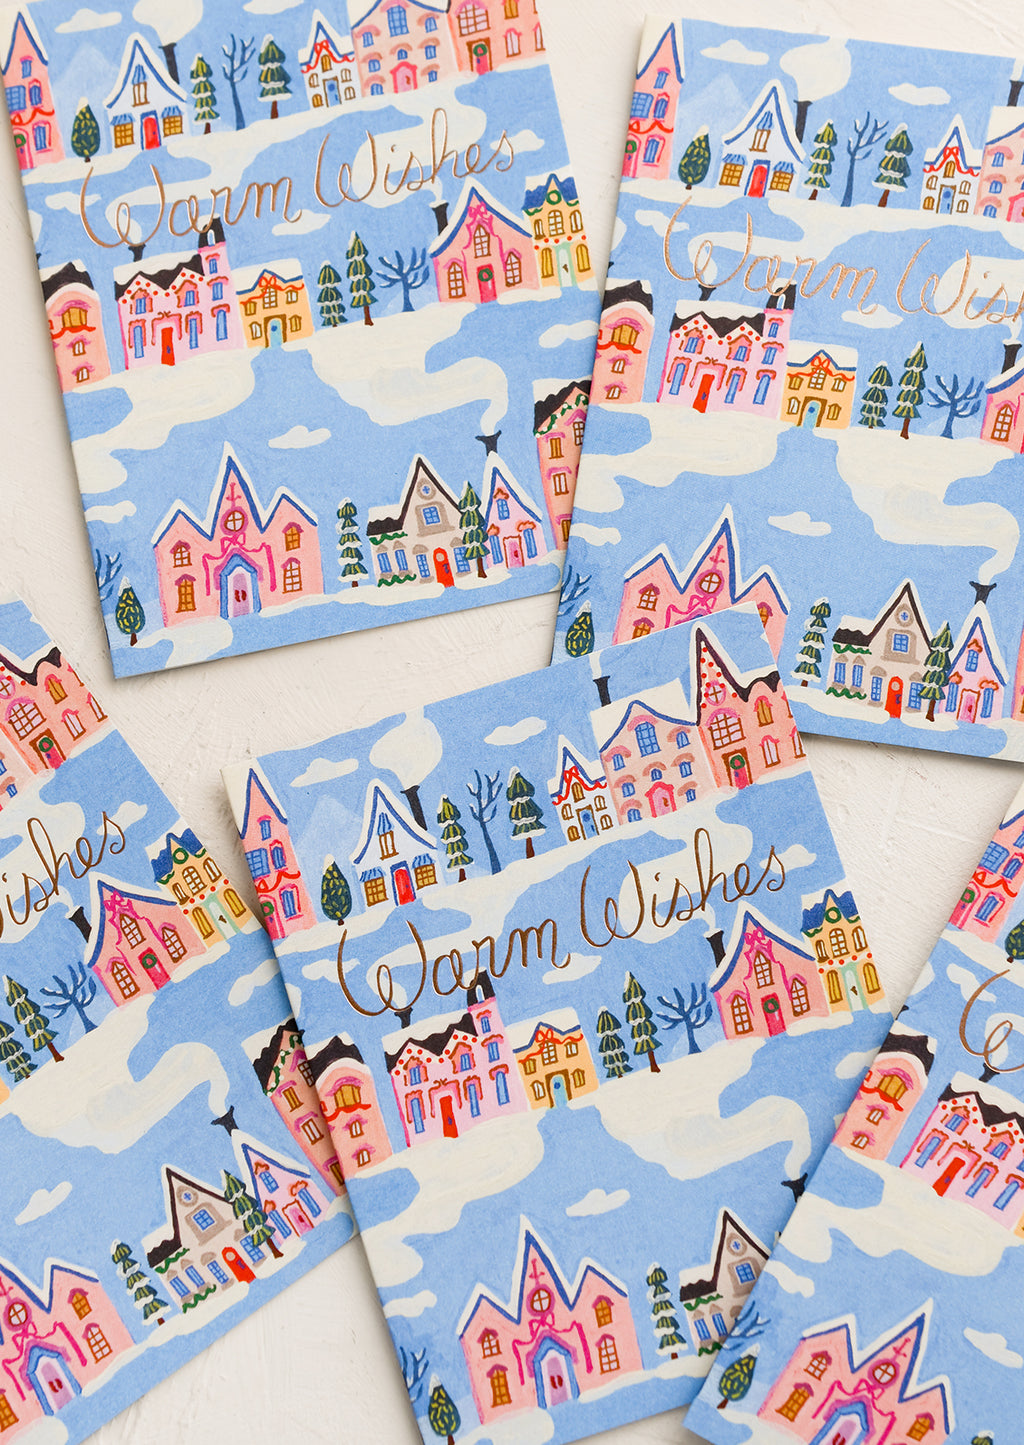 1: Greeting card with blue background and repeating rows of houses and trees. "Warm Wishes" written in copper script.